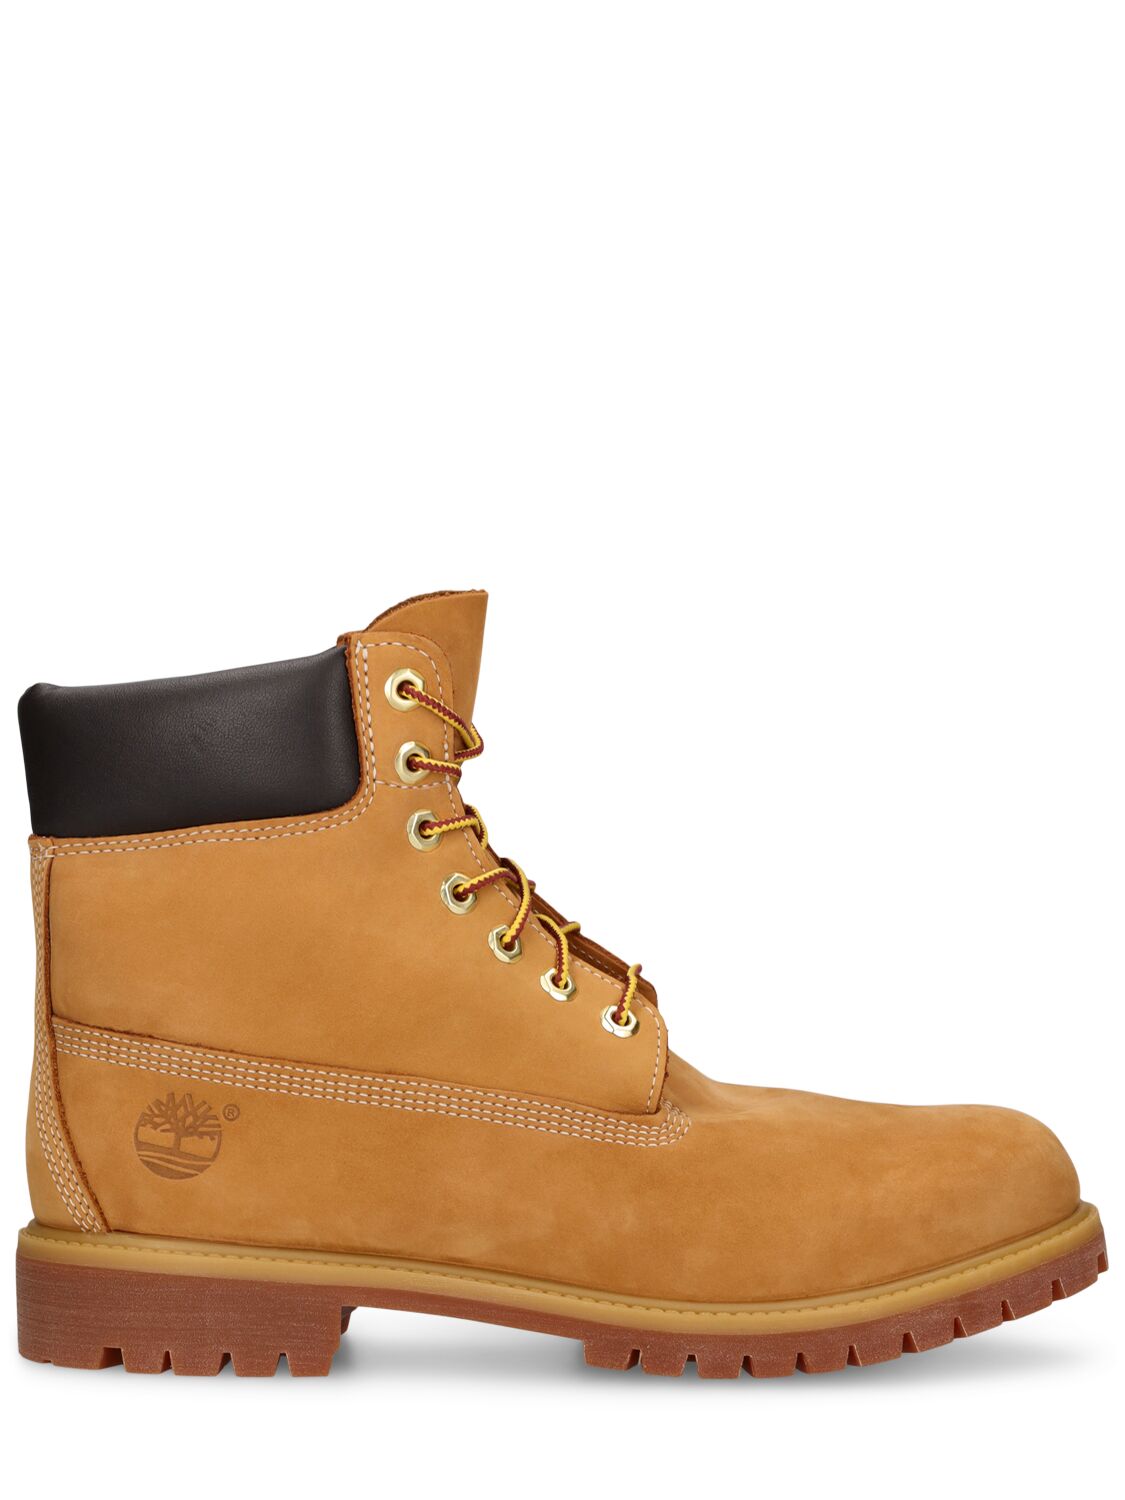 Timberland 6 Inch Premium Waterproof Lace-up Boots In Multi